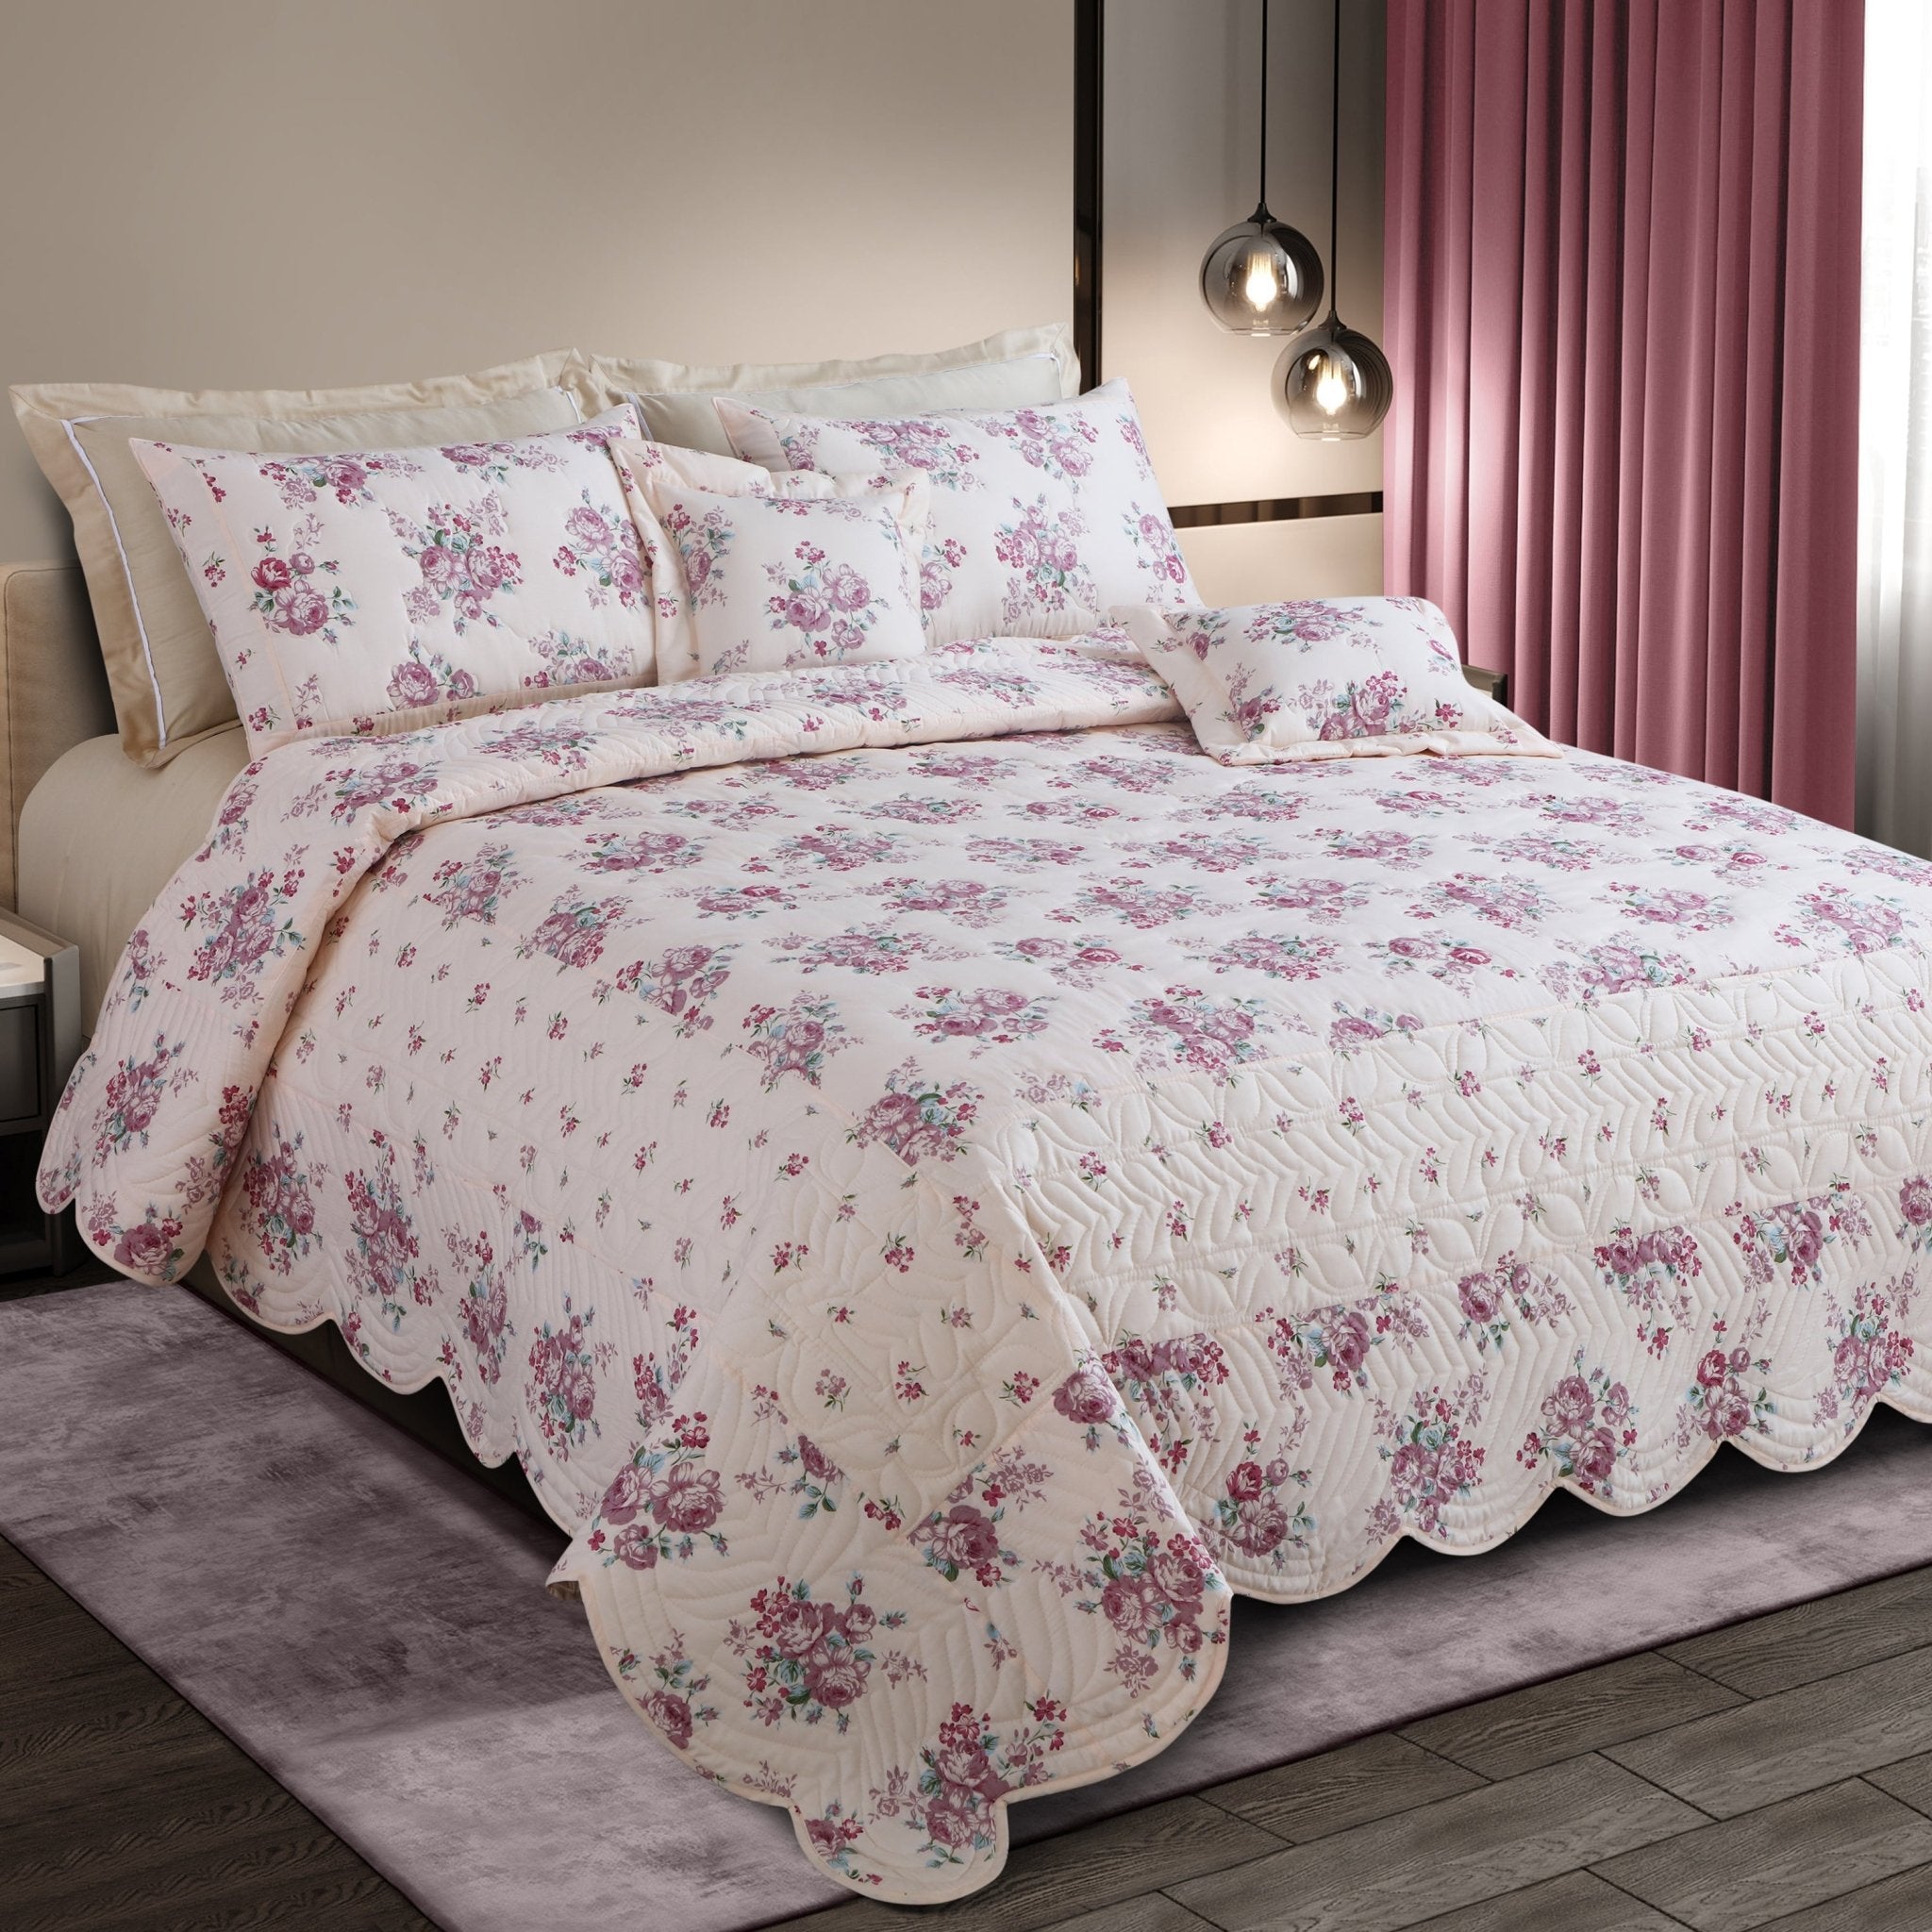 Malako Royale 100% Cotton Off White Floral King Size 5 Piece Quilted Bedspread Set - MALAKO